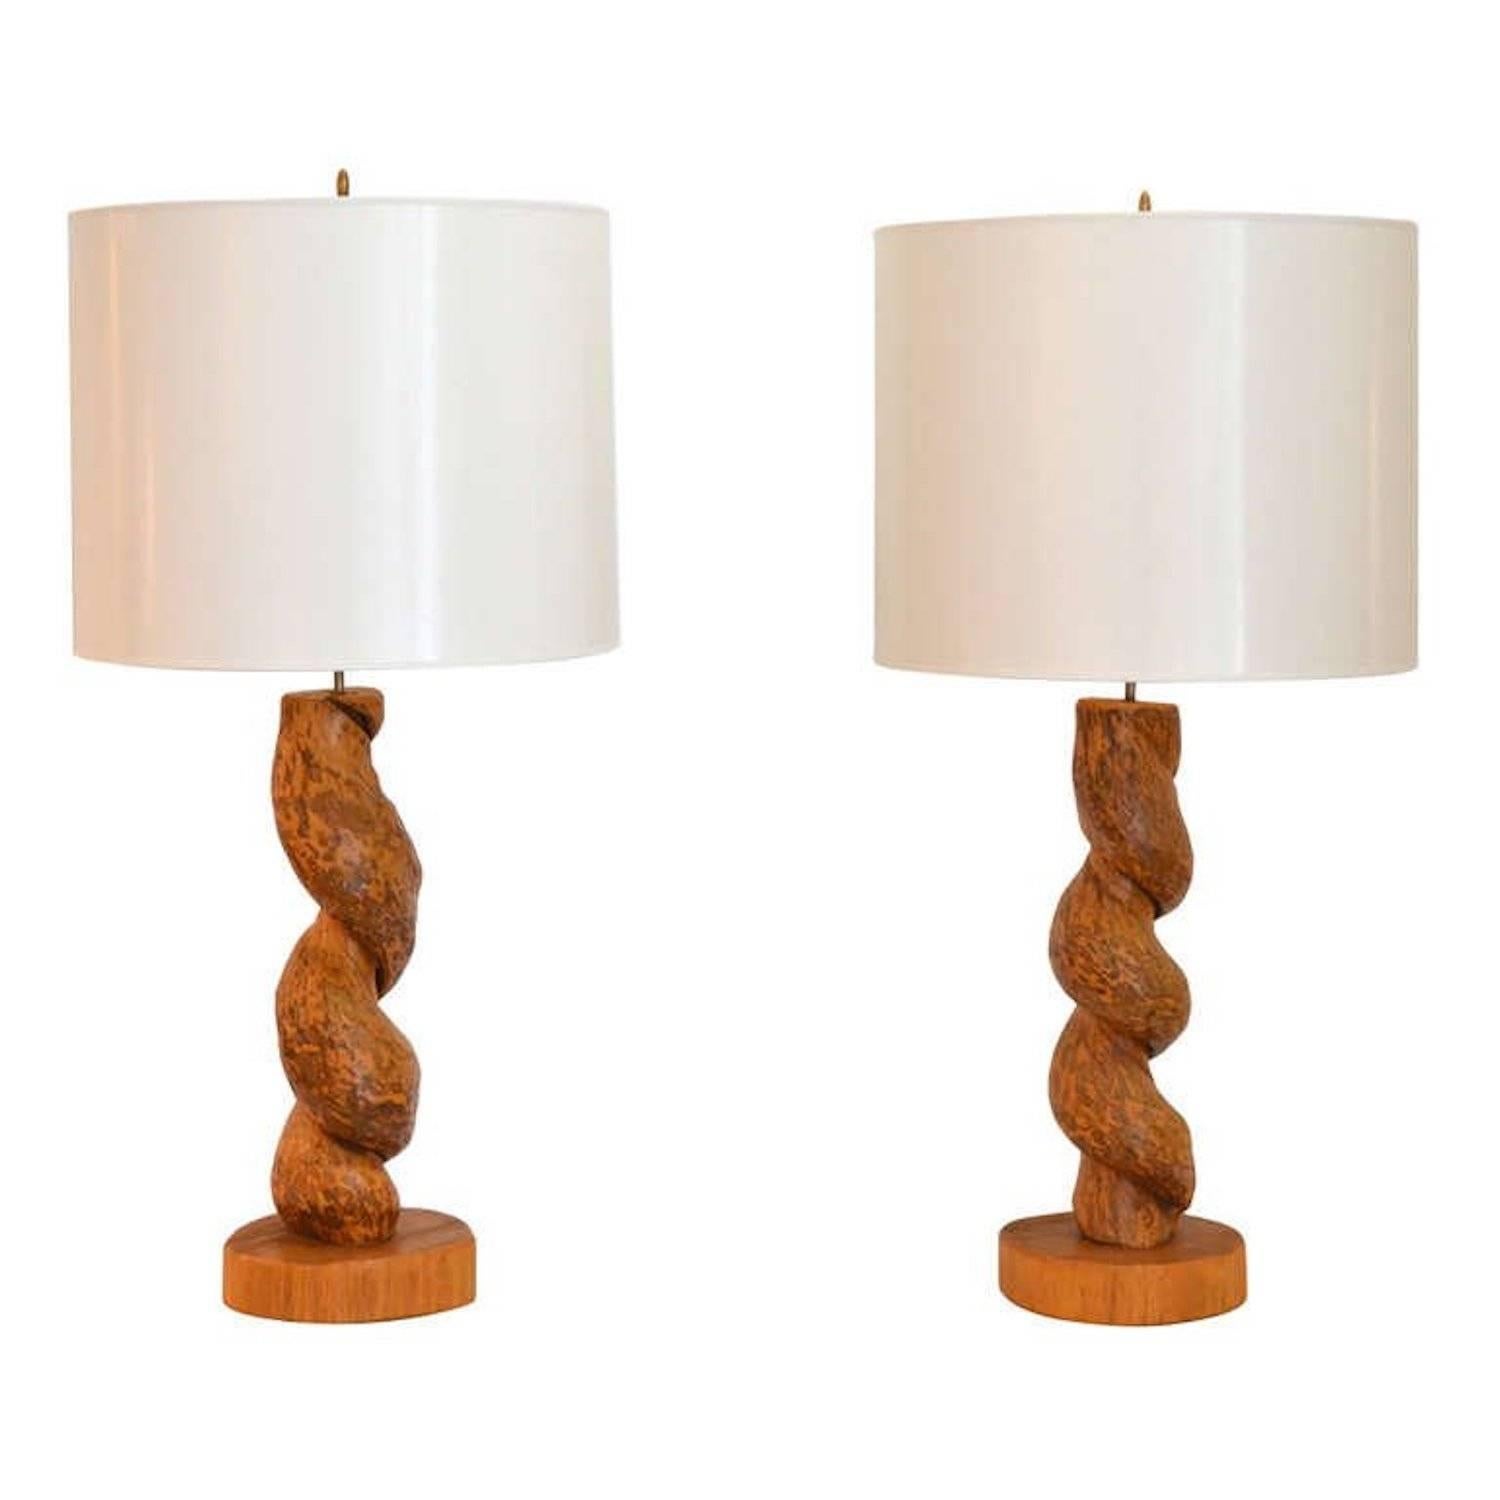 Pair of Organic Form Table Lamps For Sale